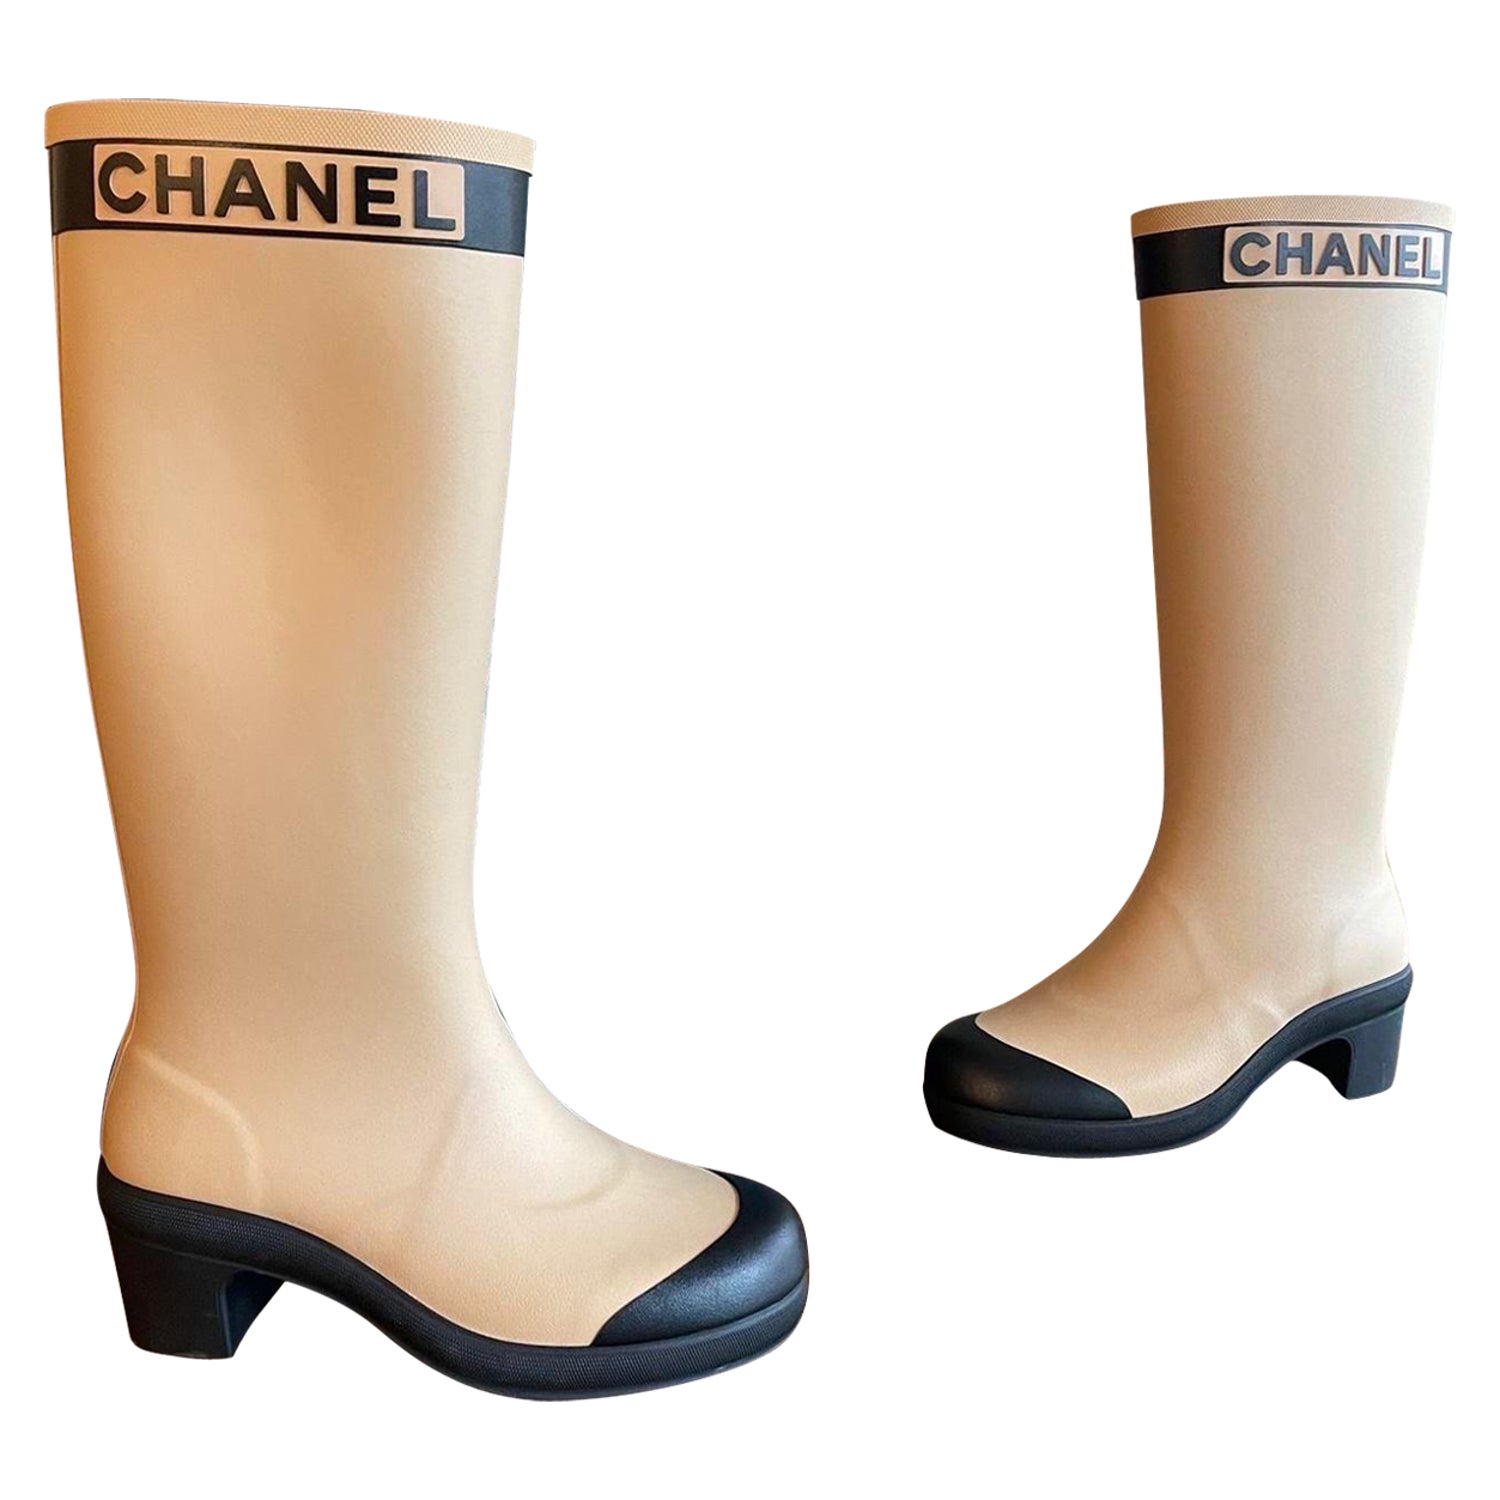 CHANEL, Shoes, Chanel 22k Pull On Rubber Rain Boots Thigh High